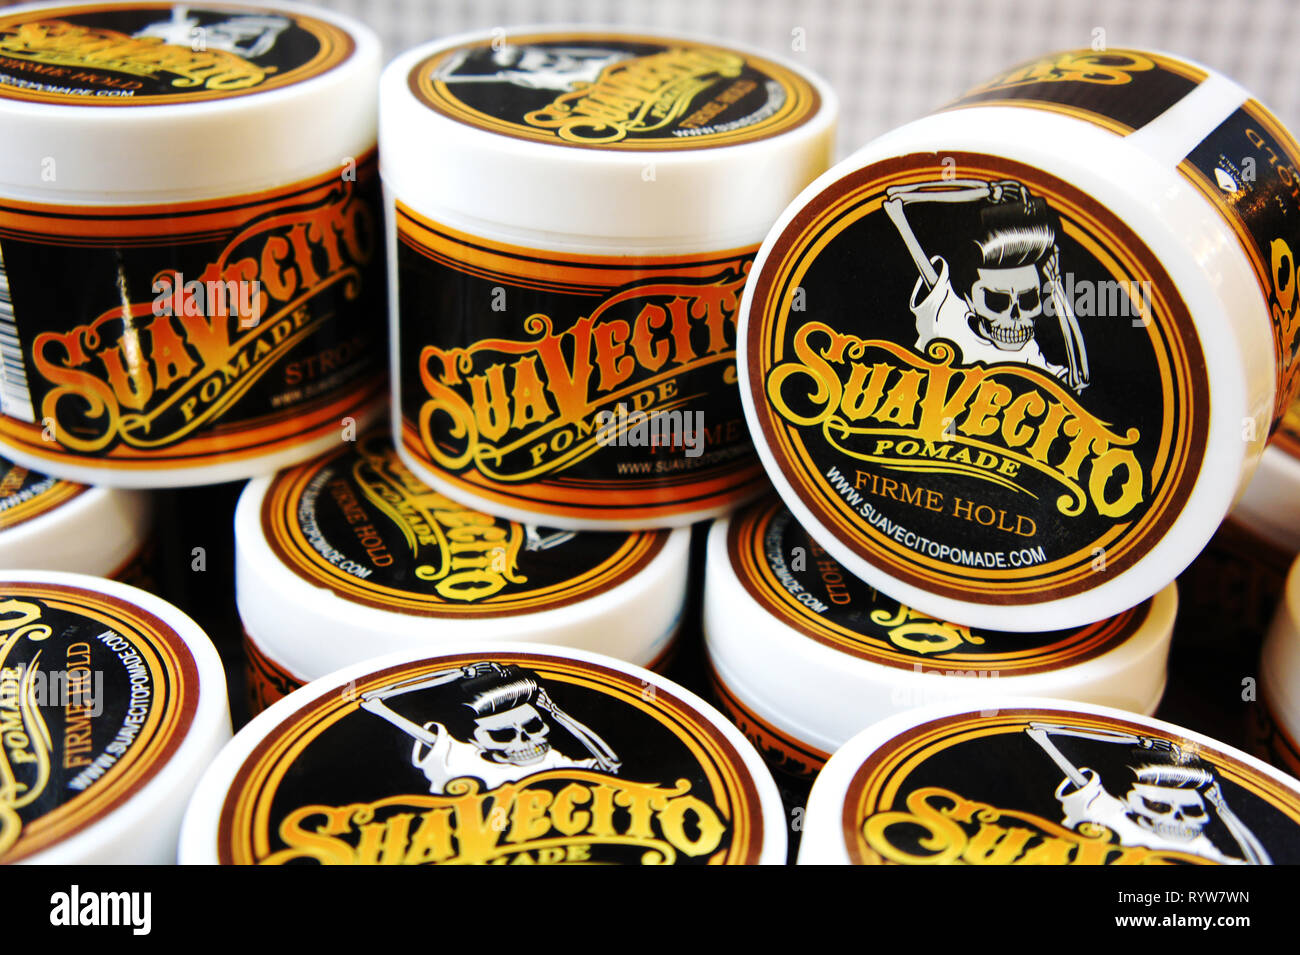 trendy barbershop styling. gel for male styling - SuaVecito. SuaVecito  pomade strong firme hold Stock Photo - Alamy